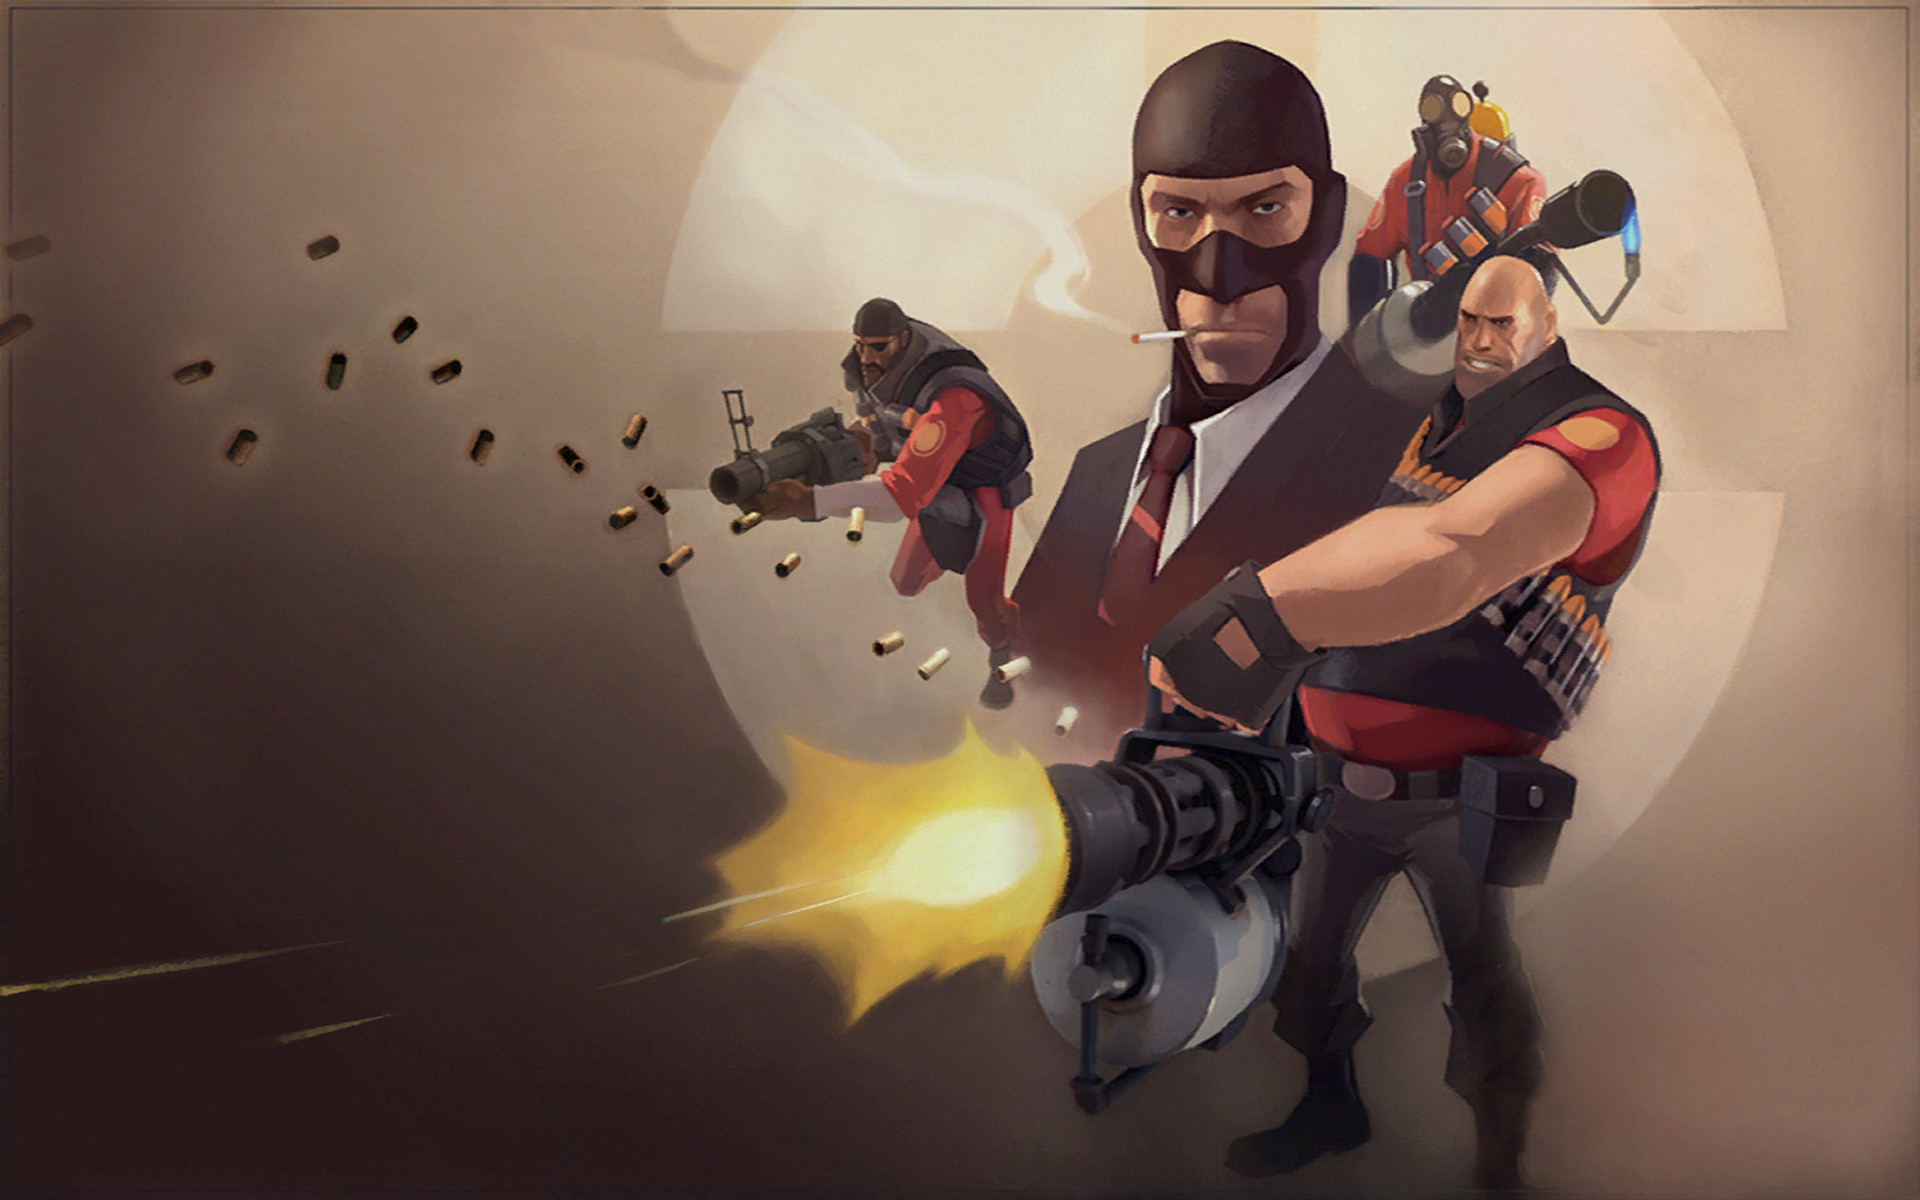 1920x1200 team fortress 2 Wallpaper Background | 46743